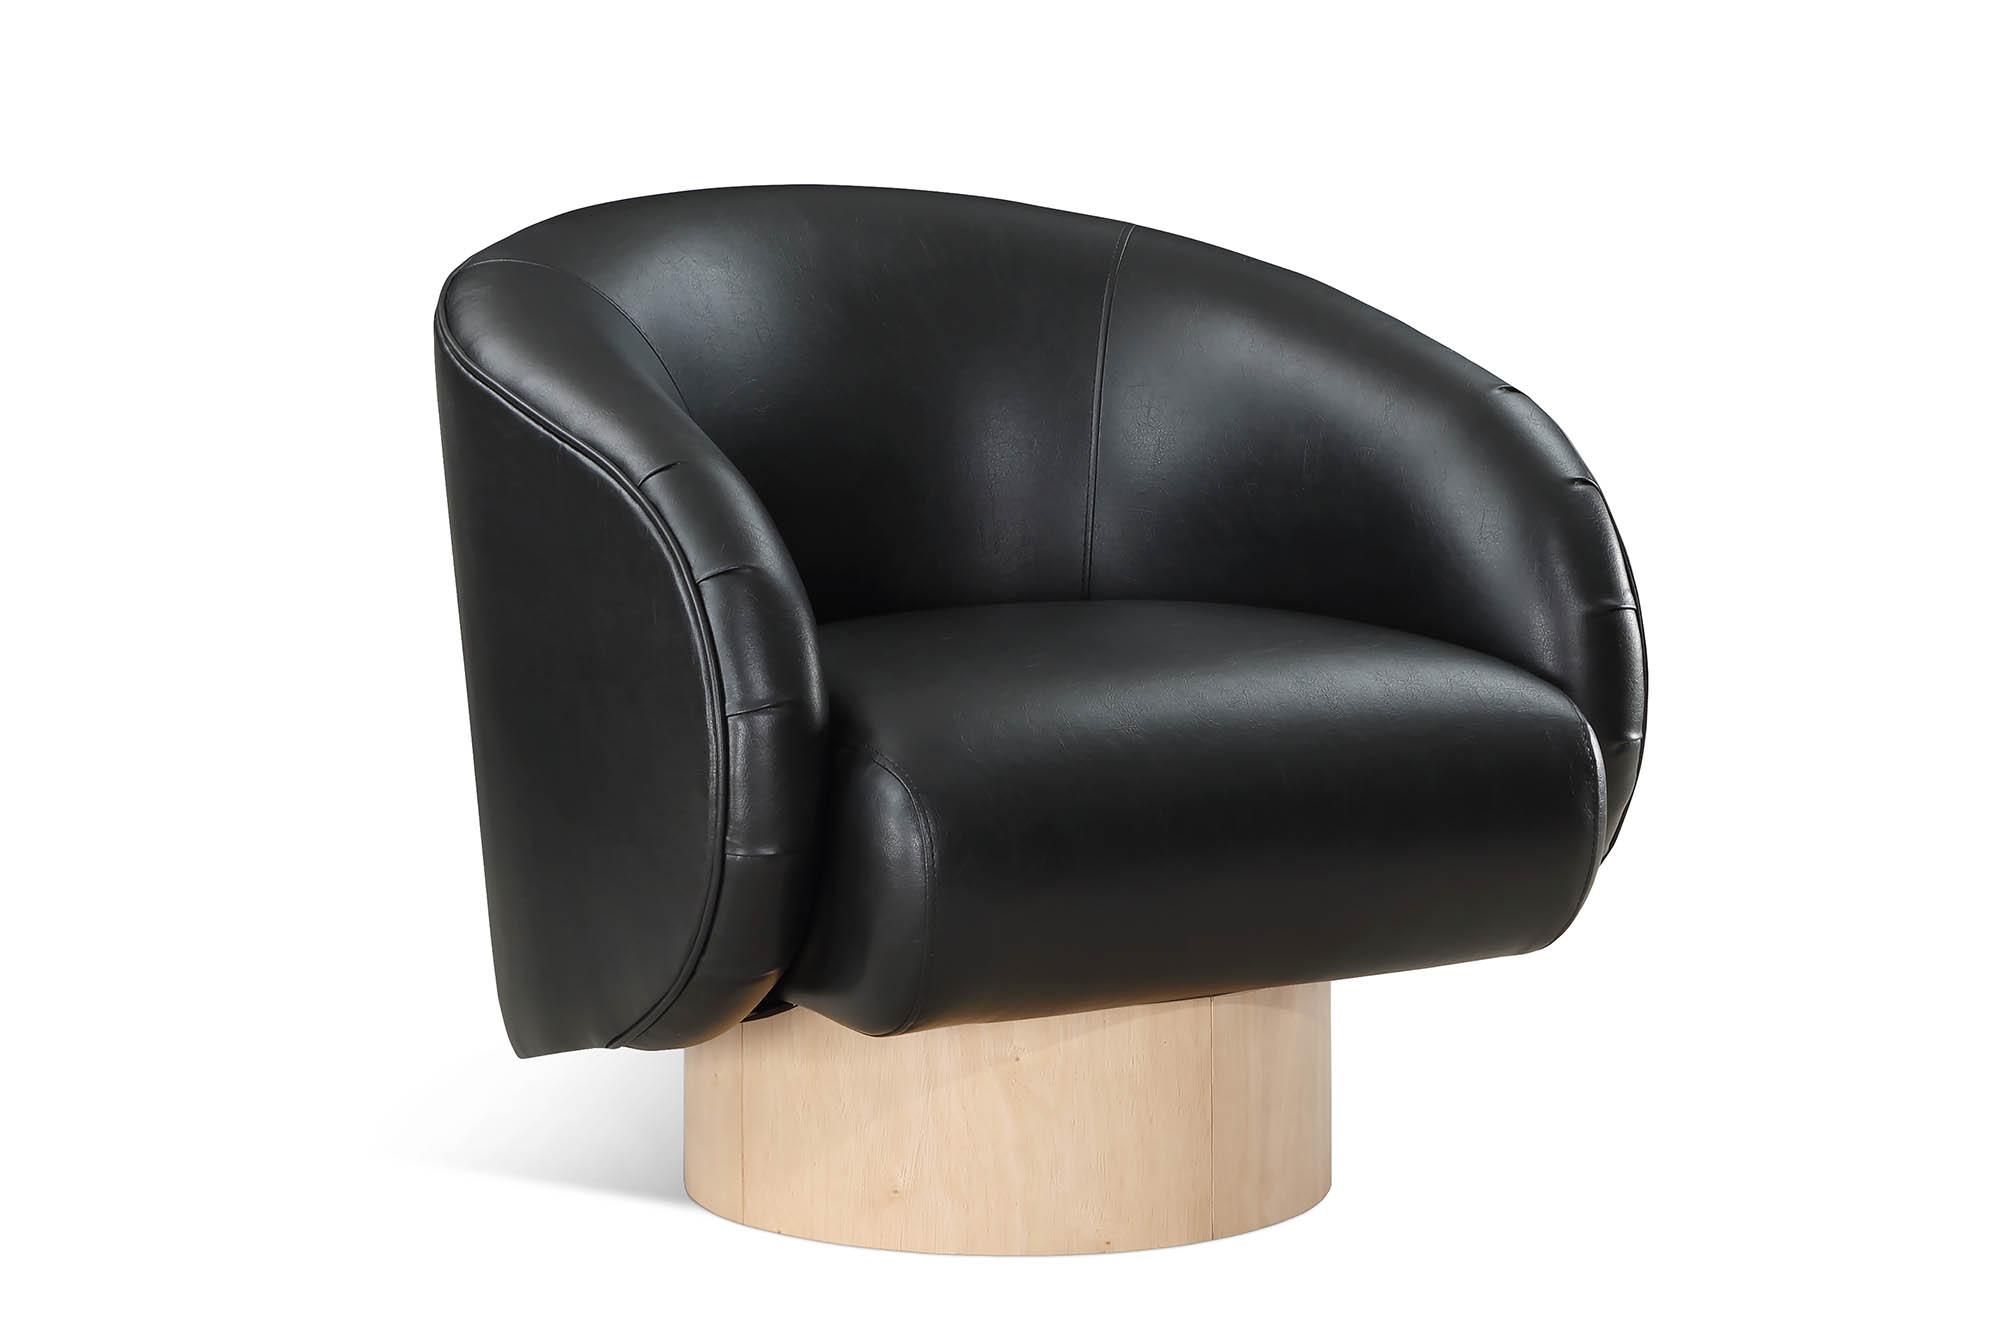 Contemporary, Modern Swivel Chair GIBSON 484Black 484Black in Black Faux Leather